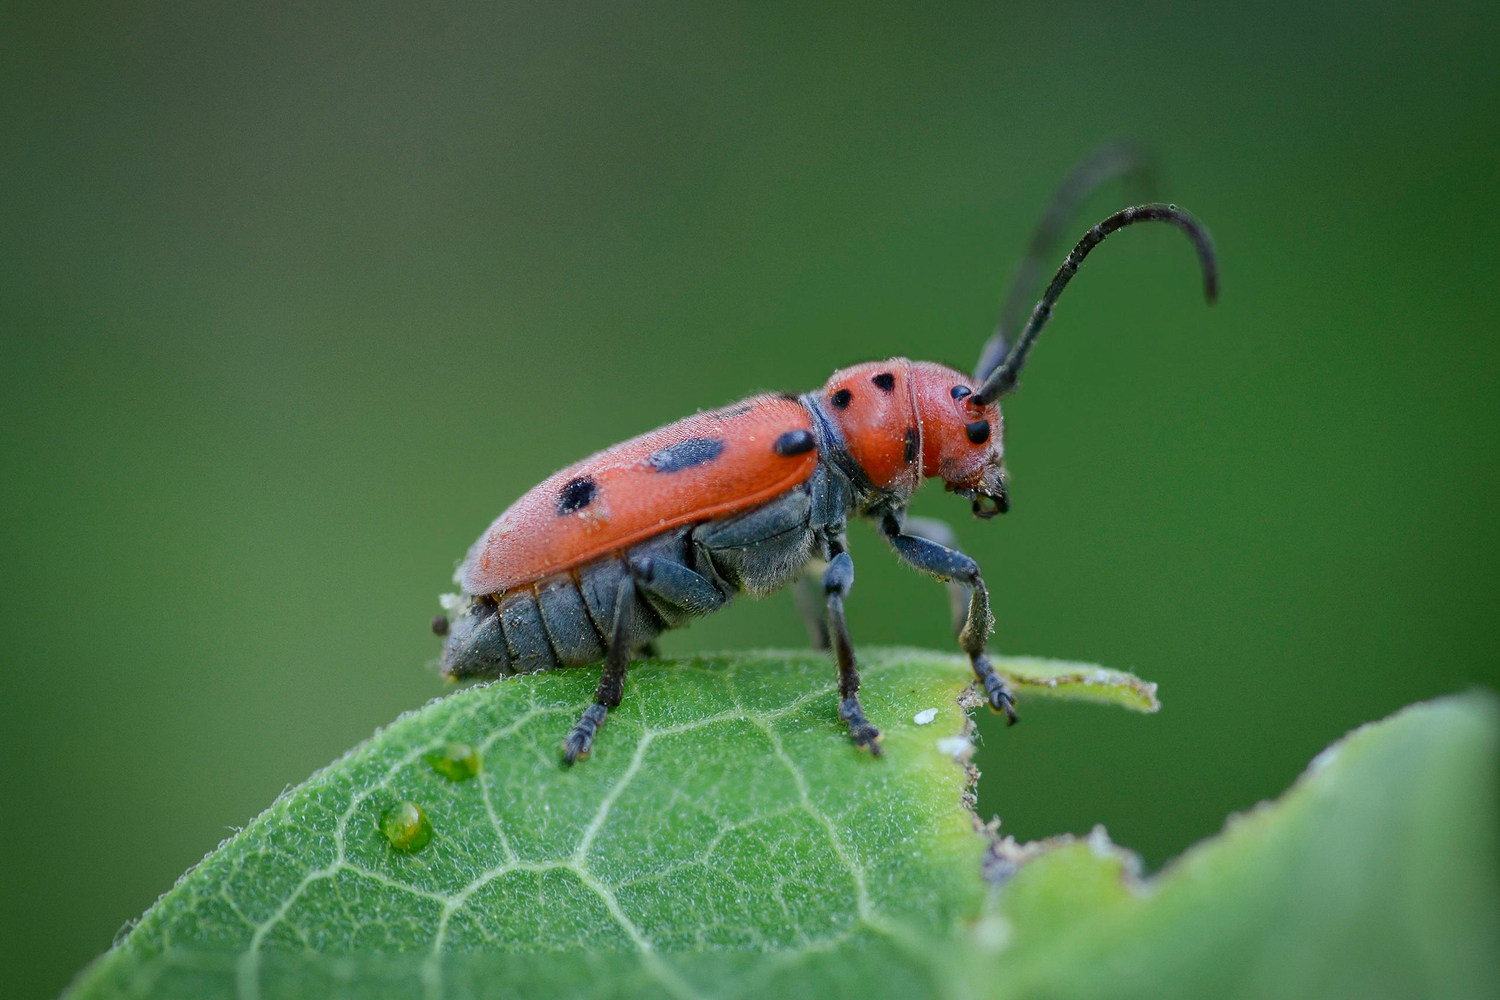 Close up of a red and black spotted beetle on a green leaf.